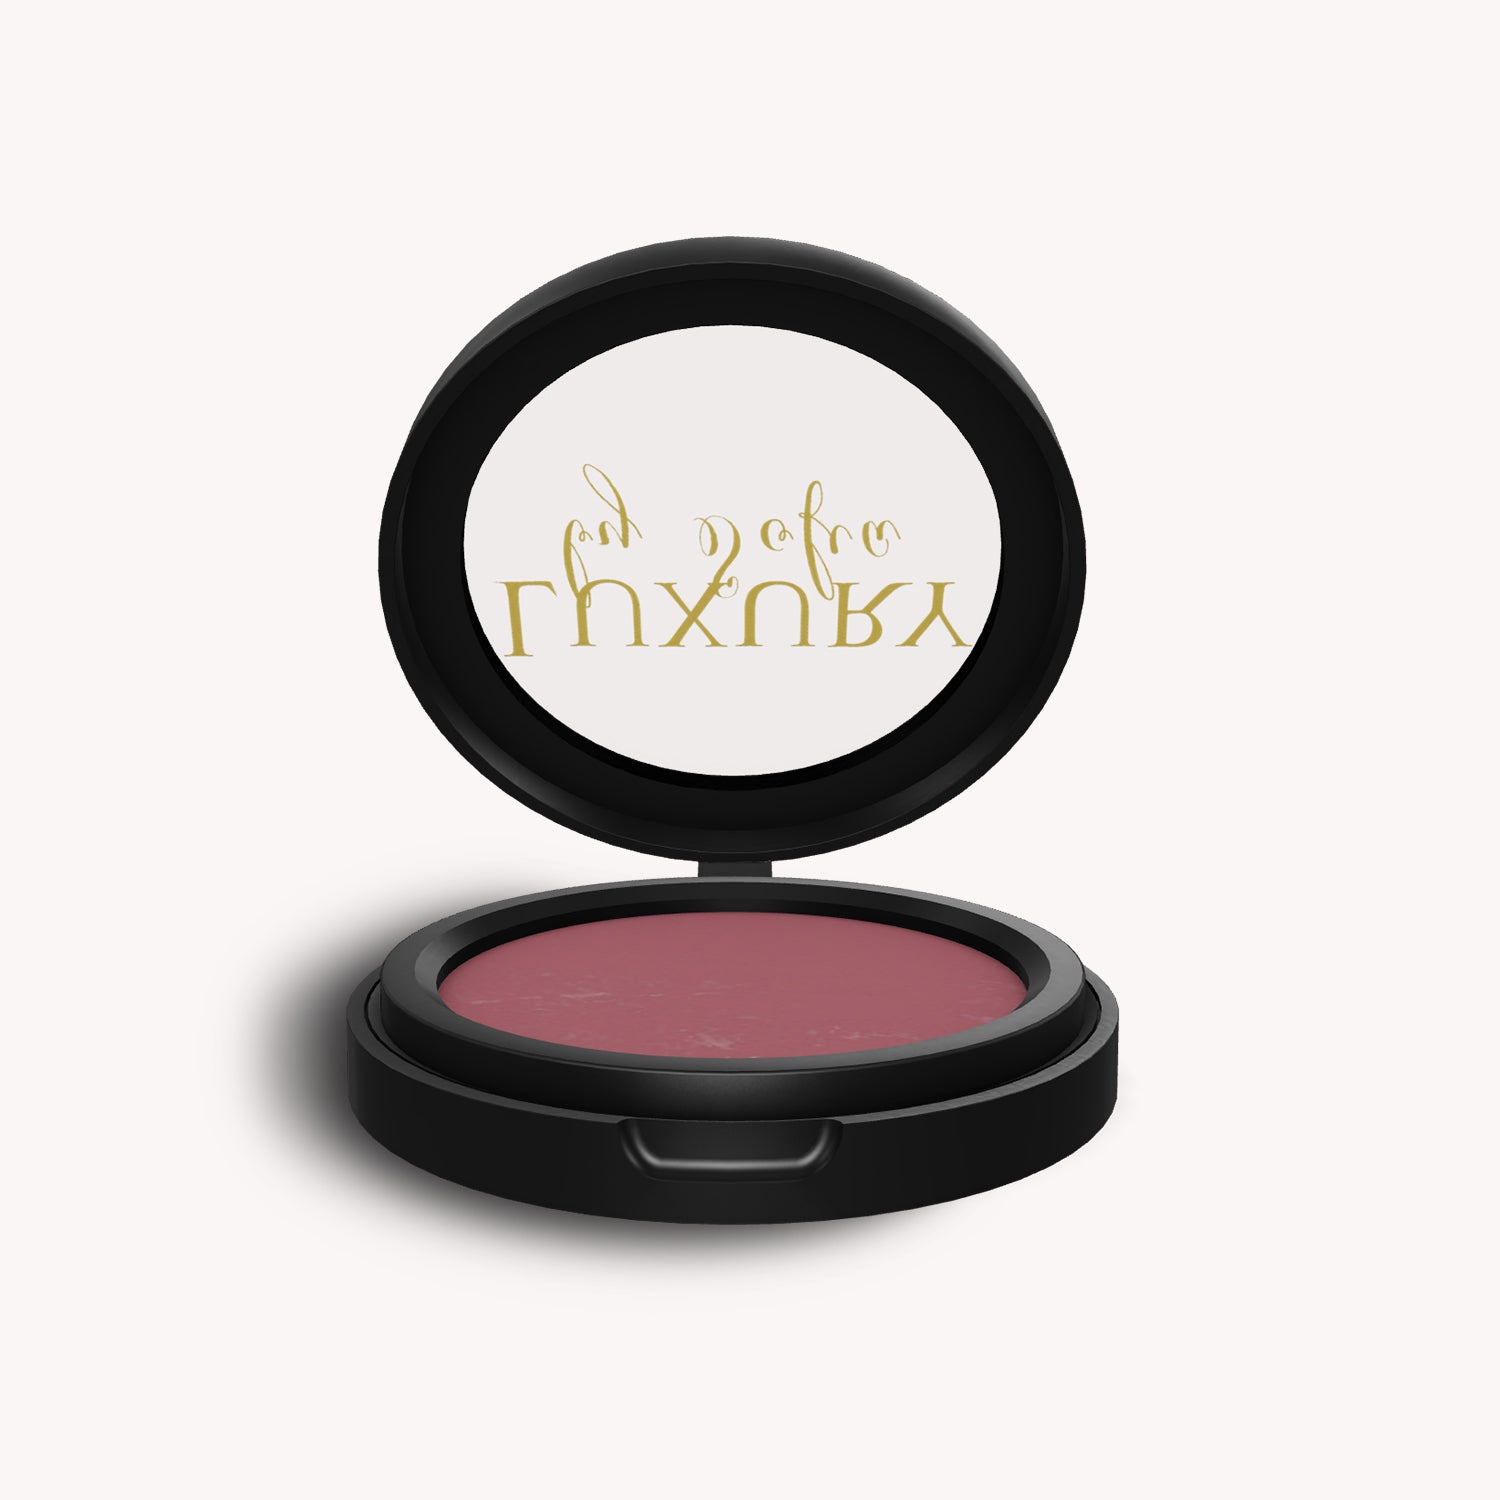 Natural Pink Cream Blush for a Fresh, Radiant Look